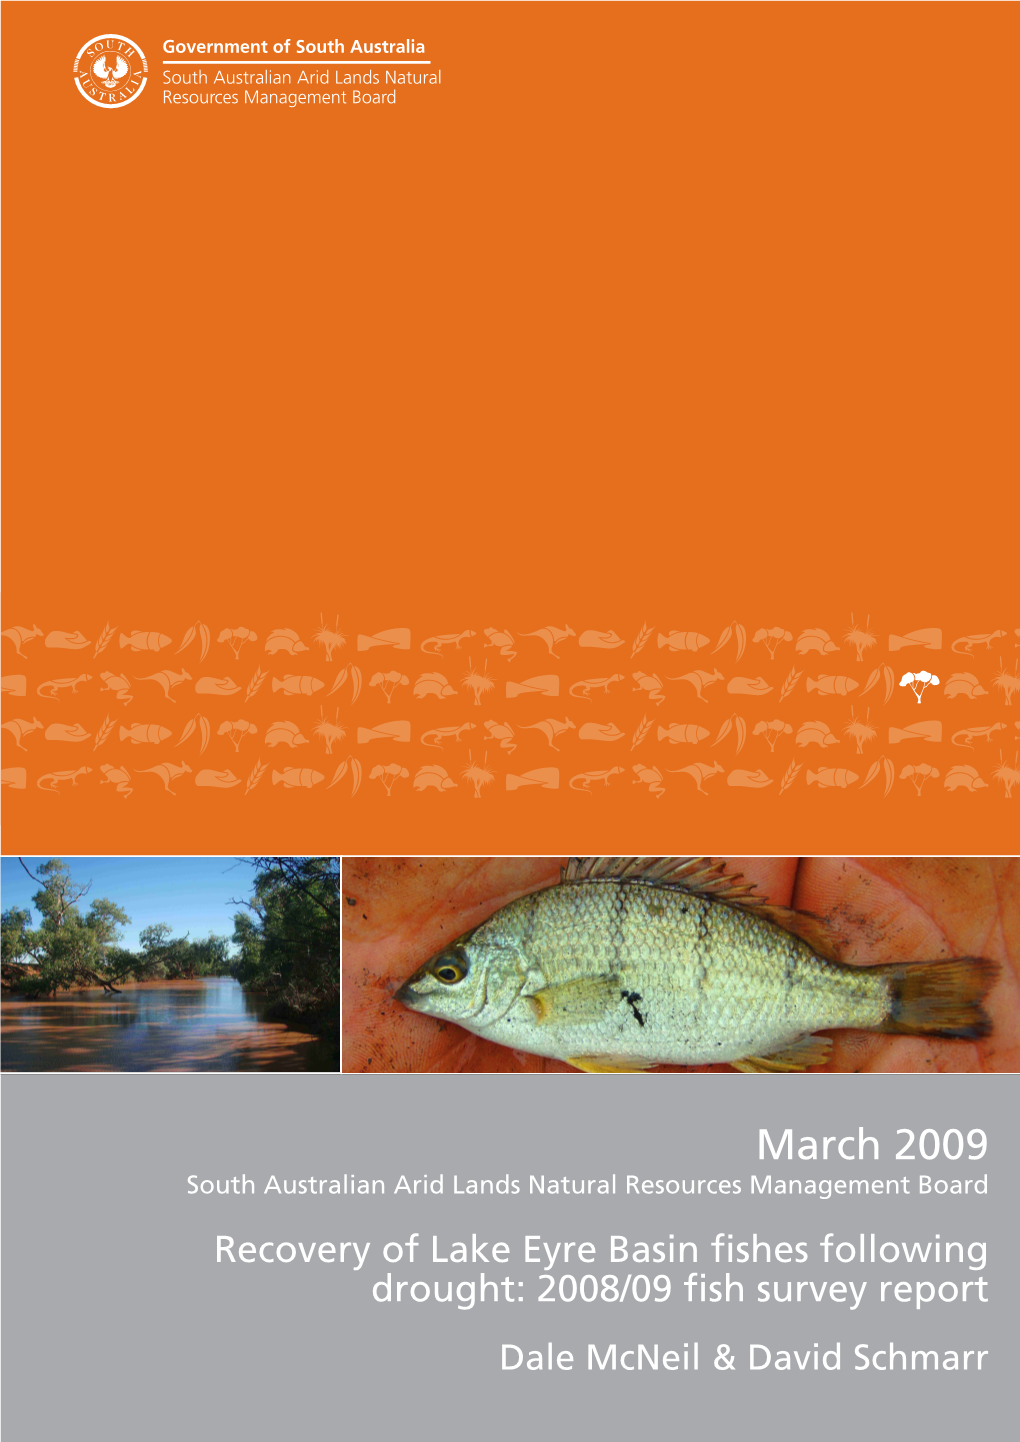 Recovery of Lake Eyre Basin Fishes Following Drought: 2008/09 Fish Survey Report Dale Mcneil & David Schmarr